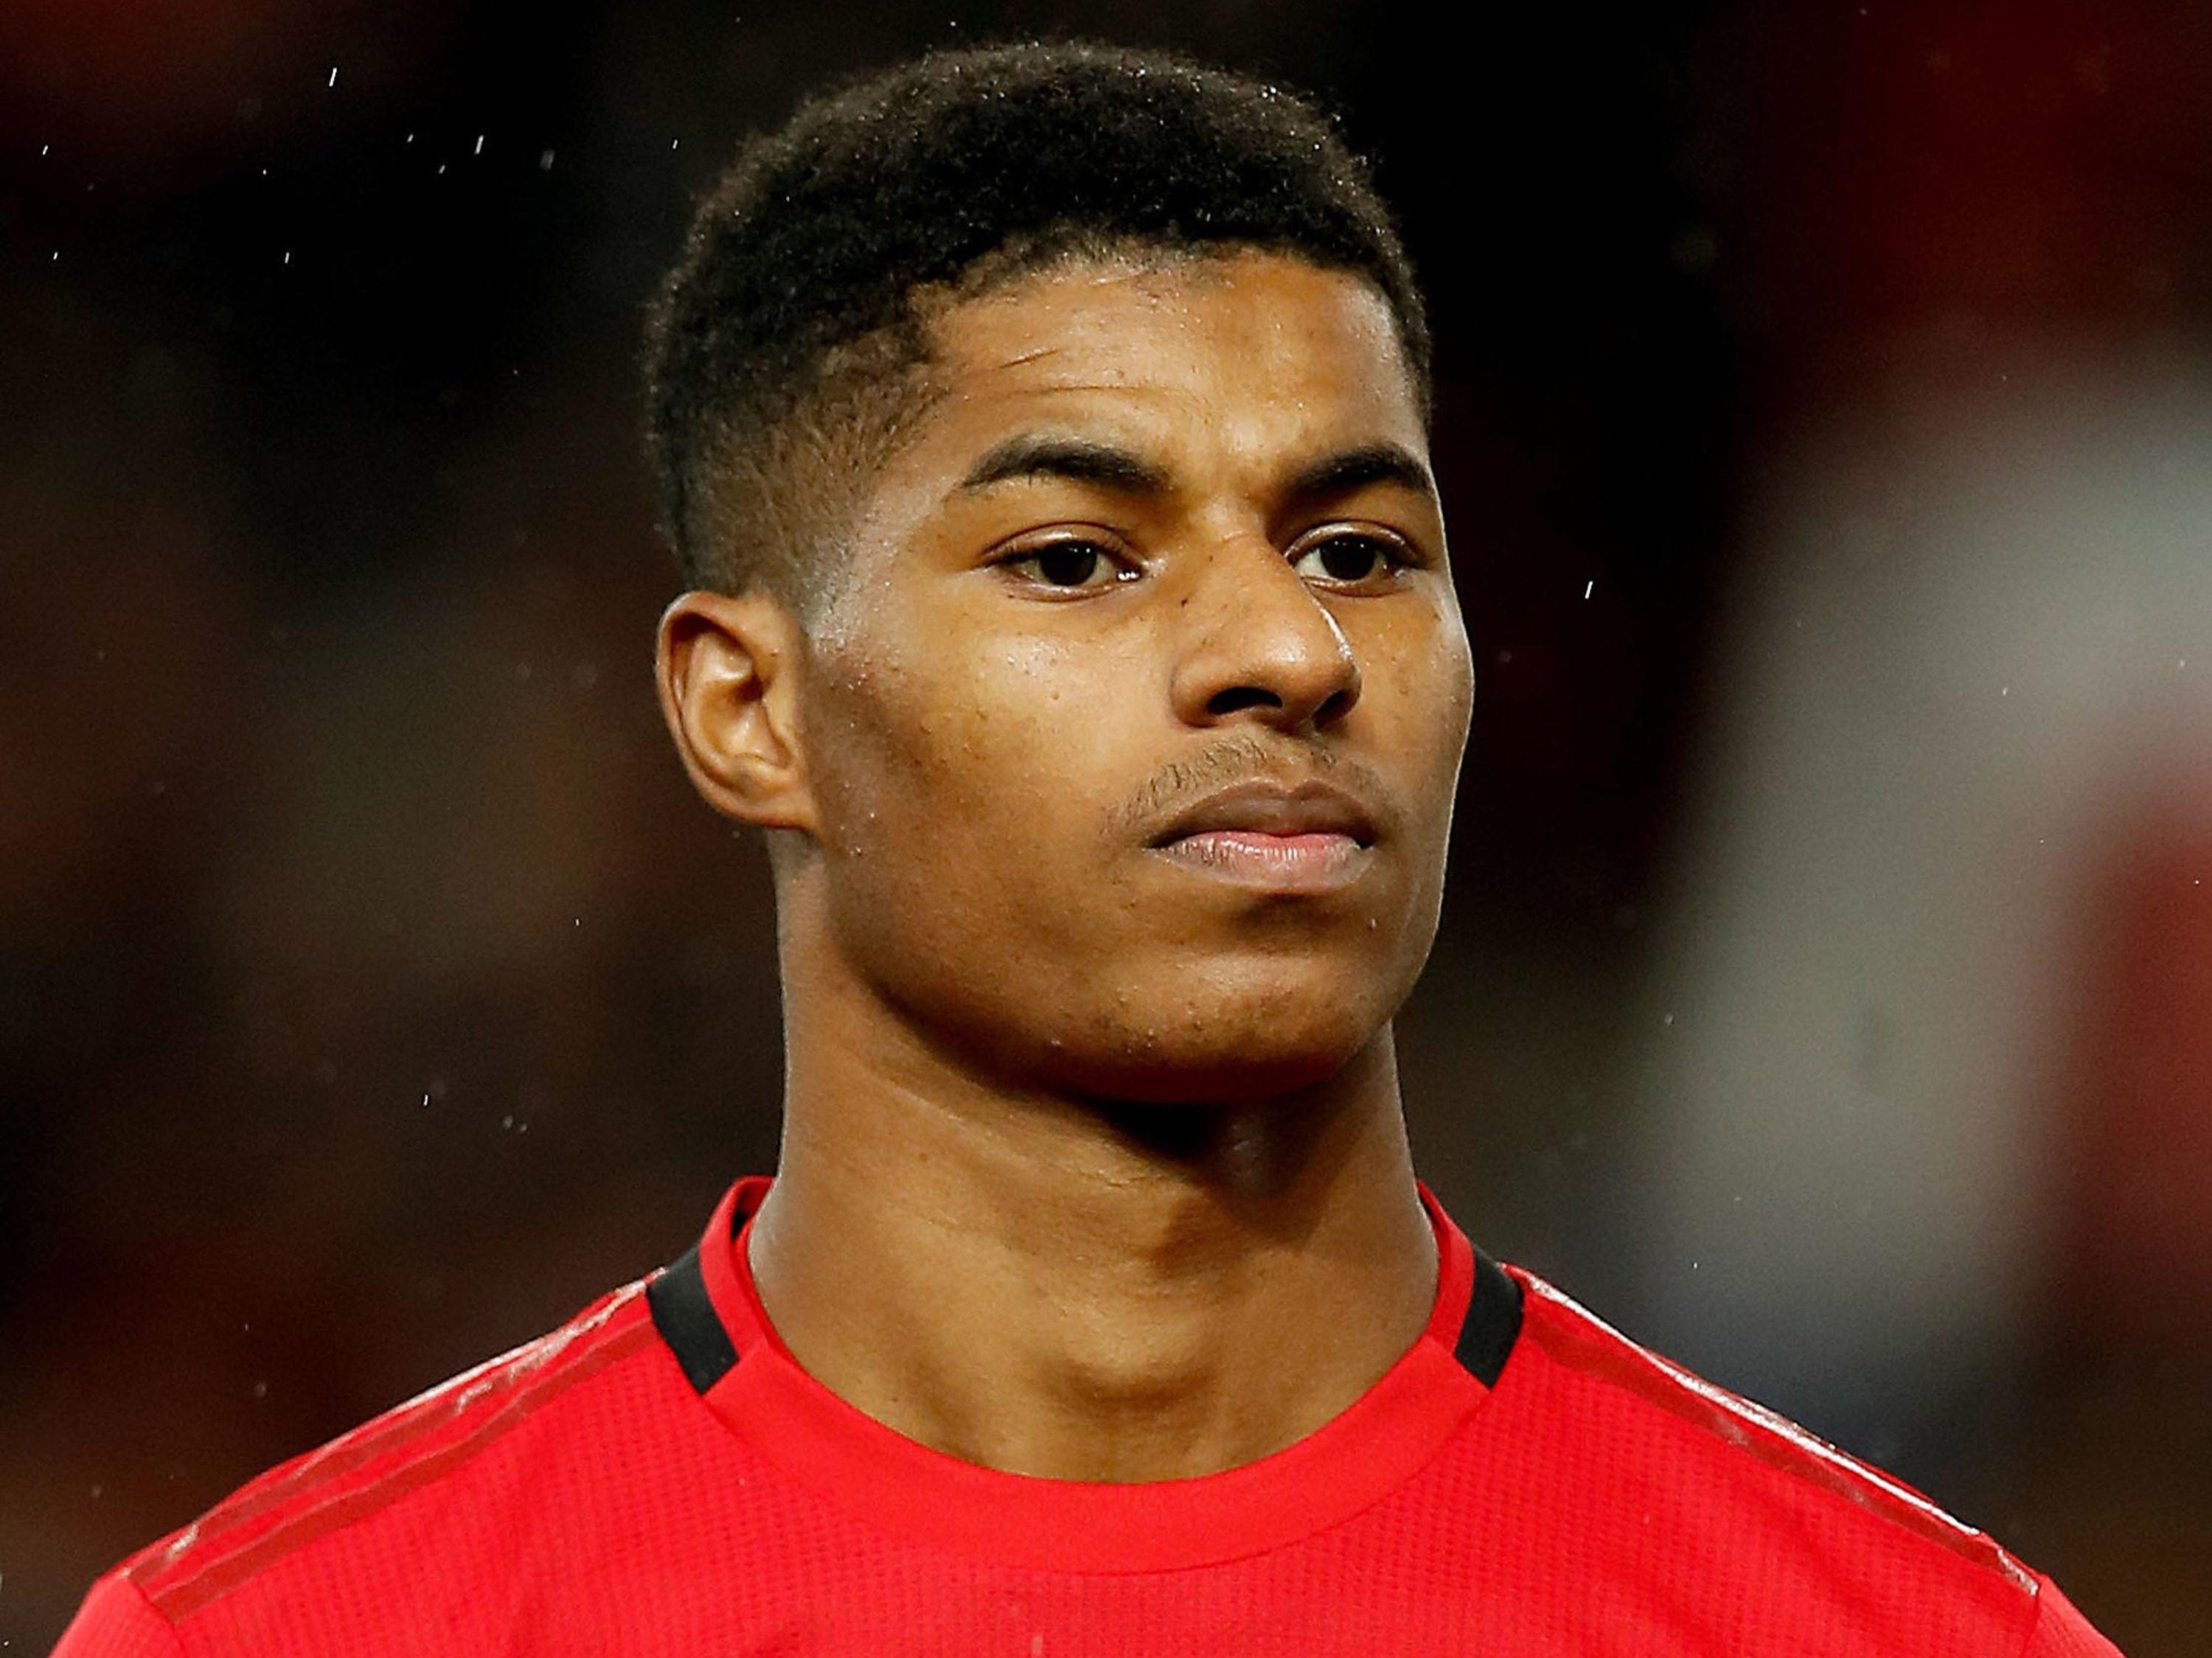 Footballer Marcus Rashford has urged the government to keep the £20 Universal Credit top-up to prevent thousands of children from going hungry